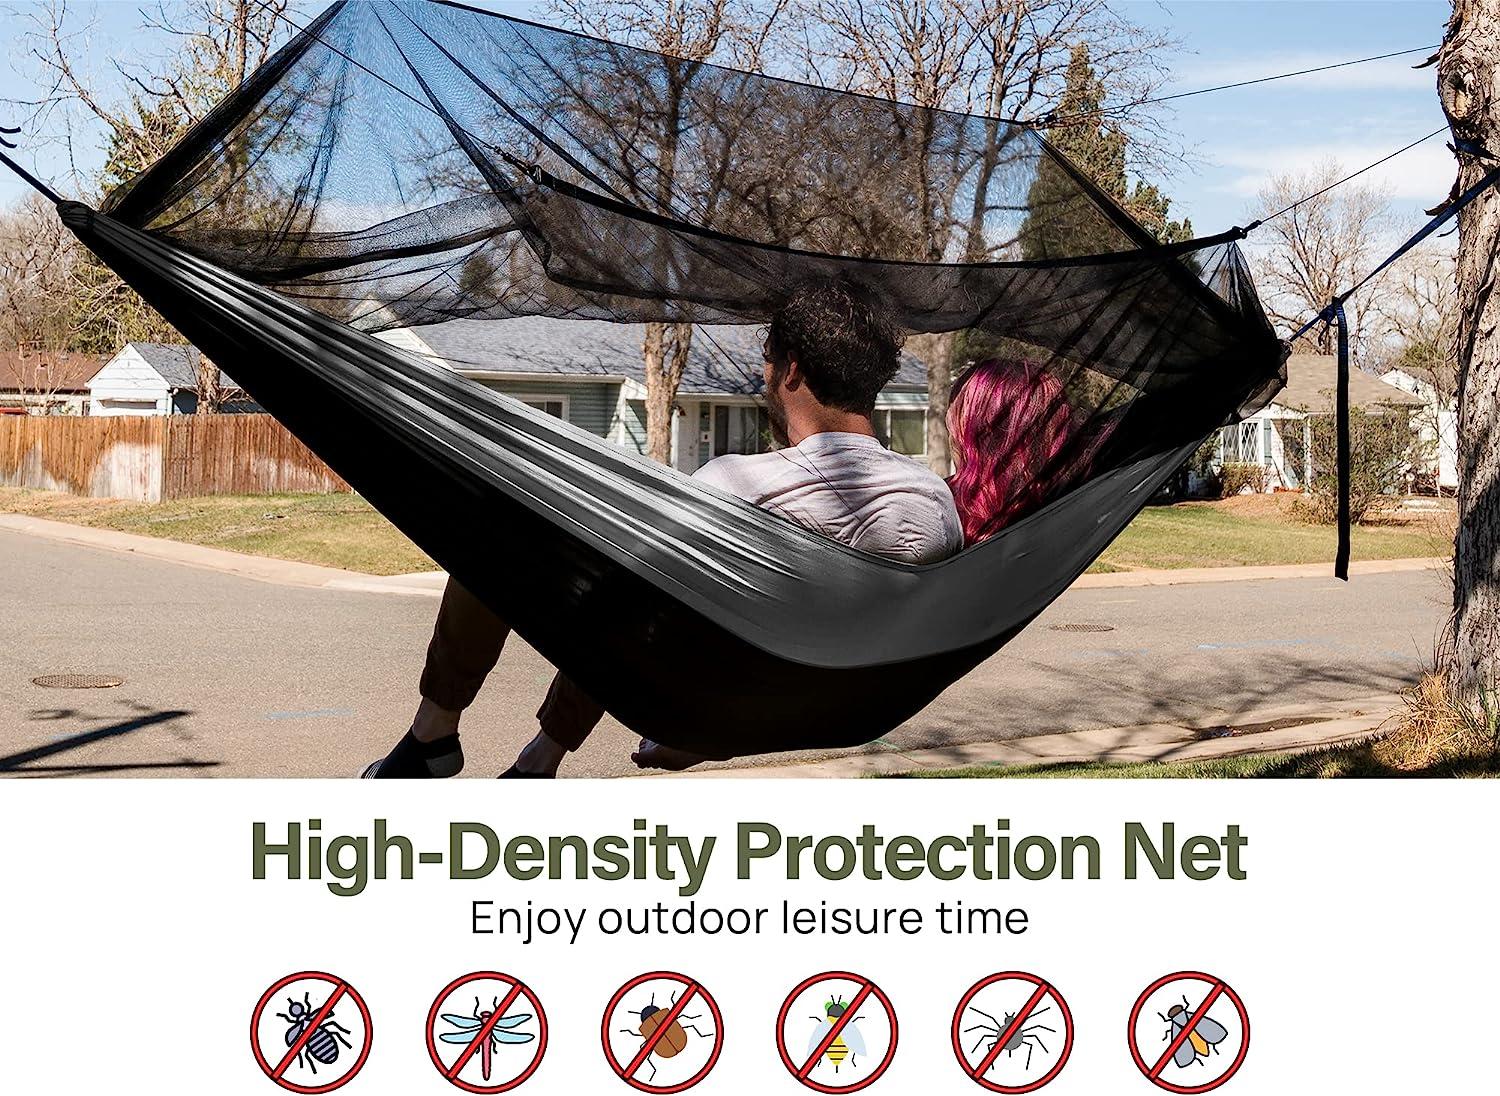 Kootek Camping Hammock with Net Double & Single Portable Hammocks Parachute  Lightweight Nylon with Tree Straps for Outdoor Adventures Backpacking Trips  Black & Grey Large